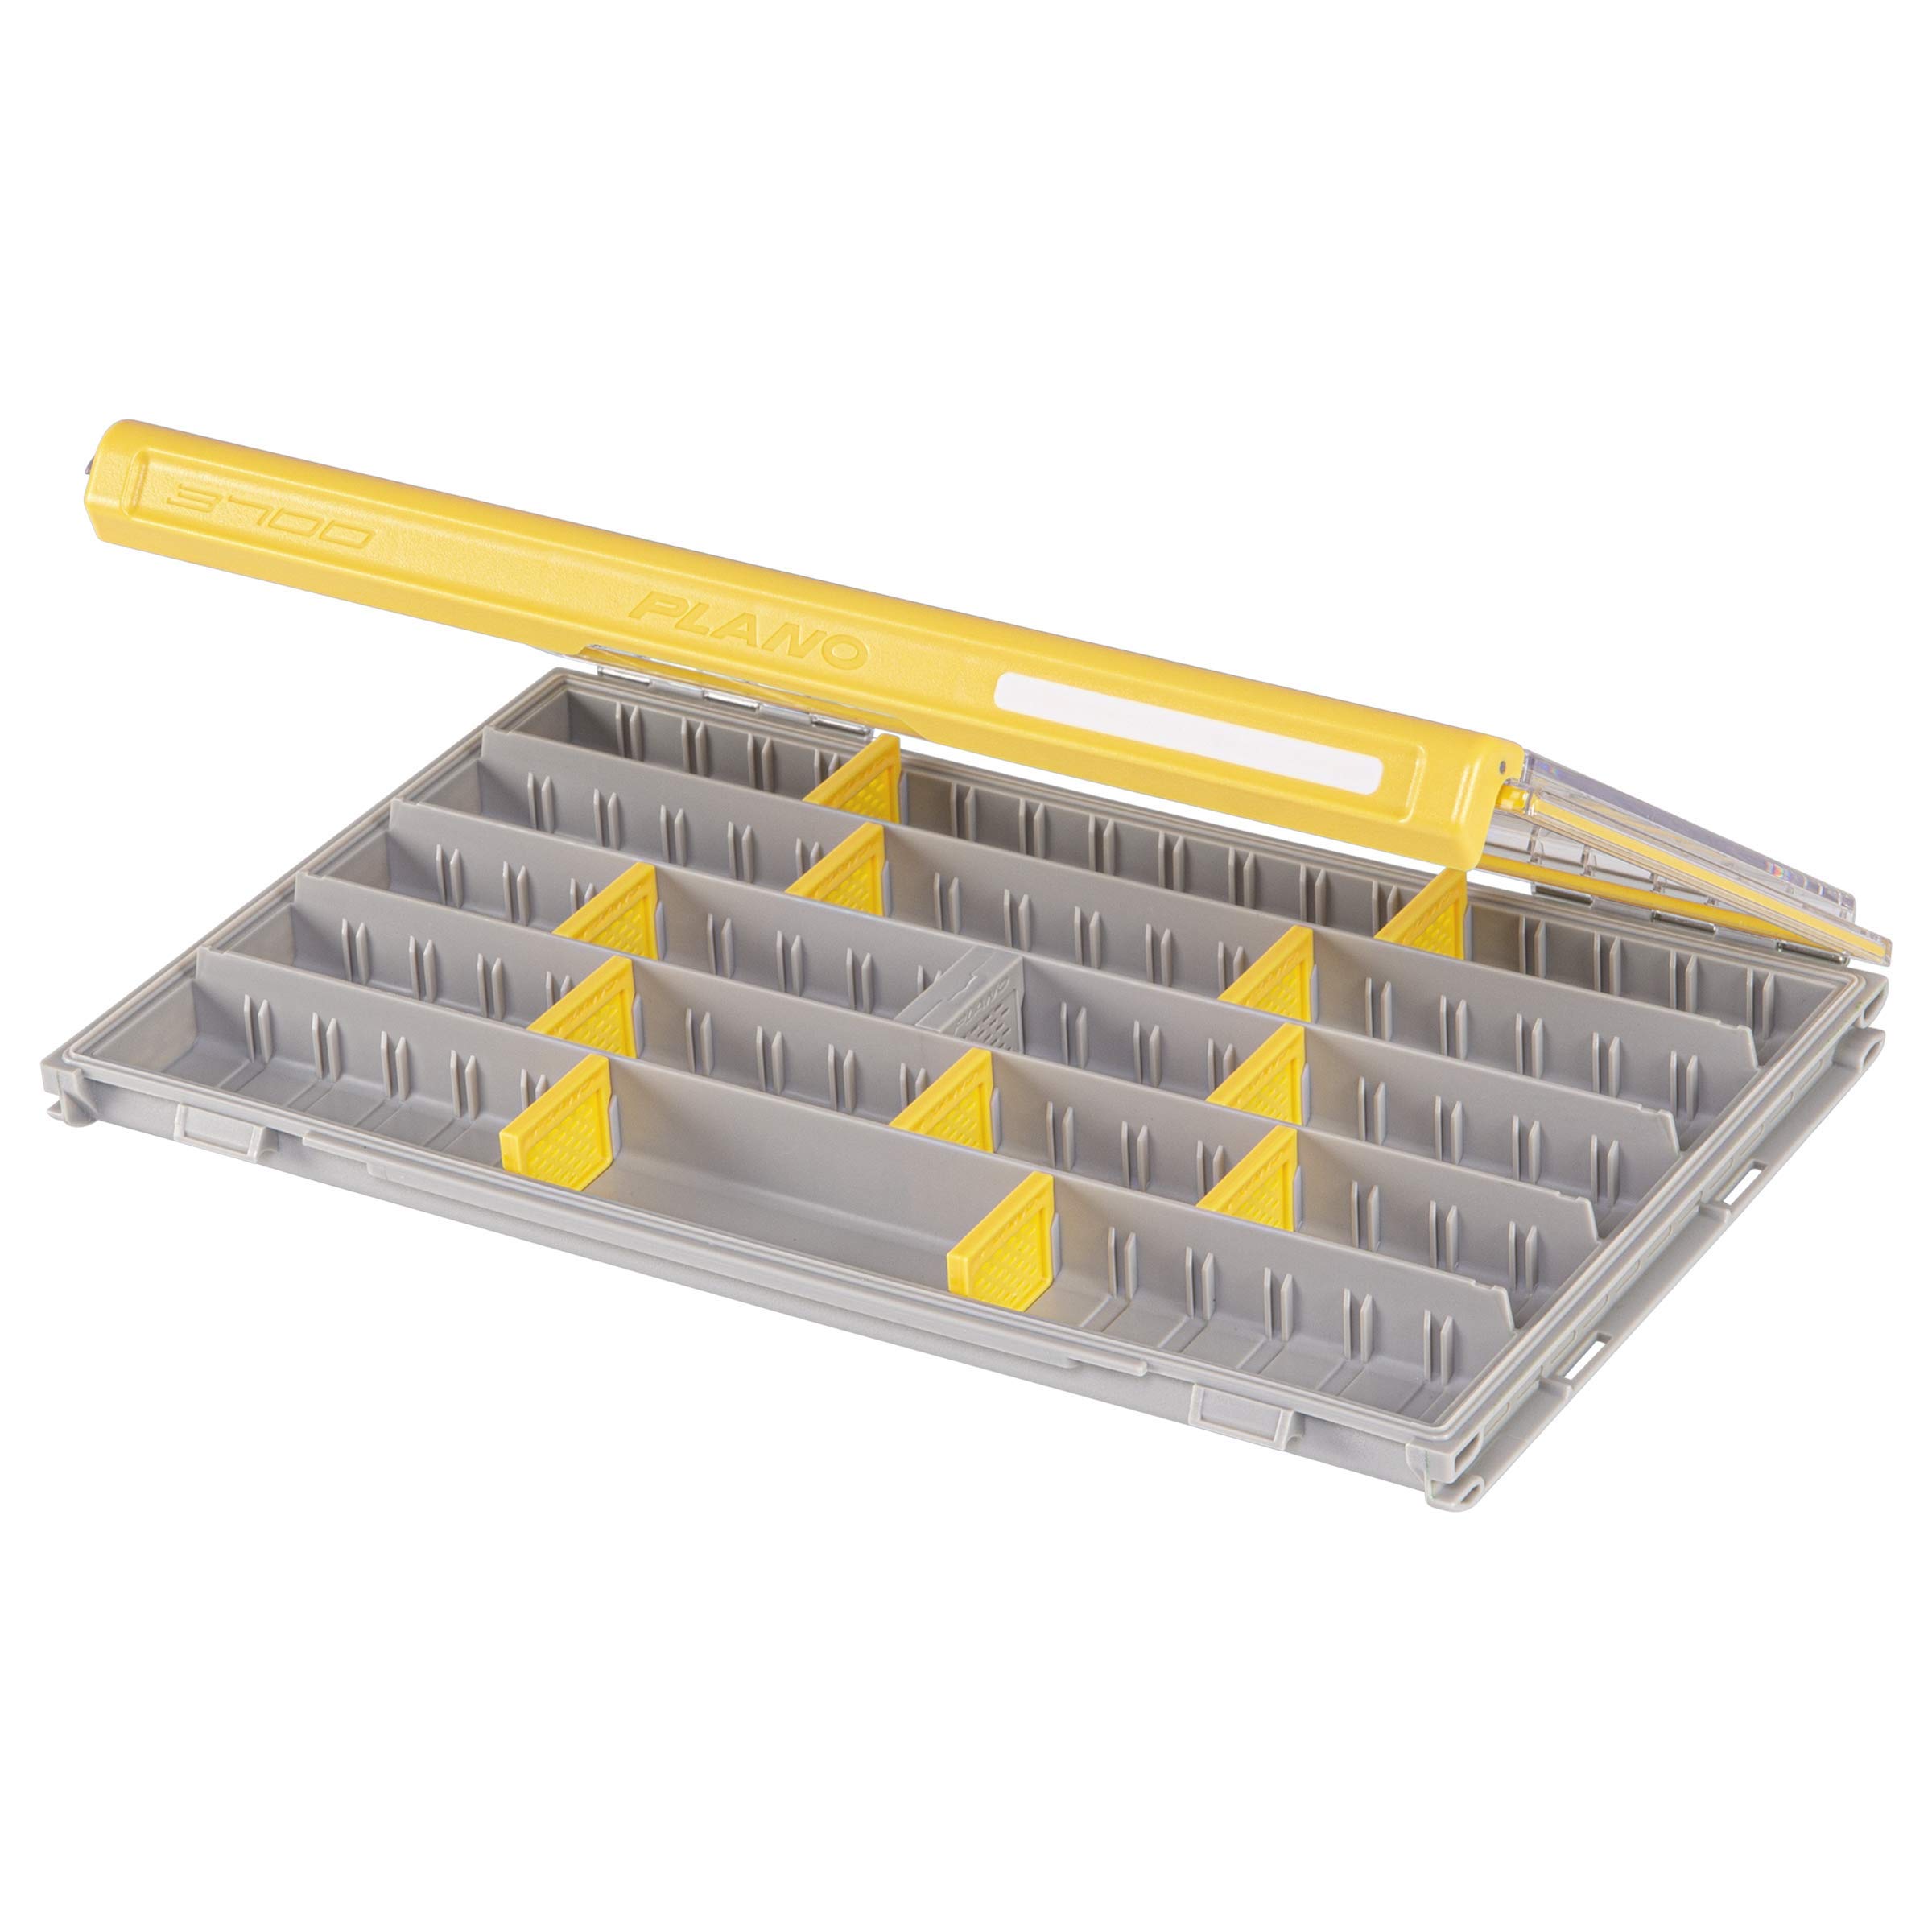 Plano Edge 3700 Premium Thin Tackle Utility Box, Clear and Yellow,  Waterproof and Rust-Resistant Bait